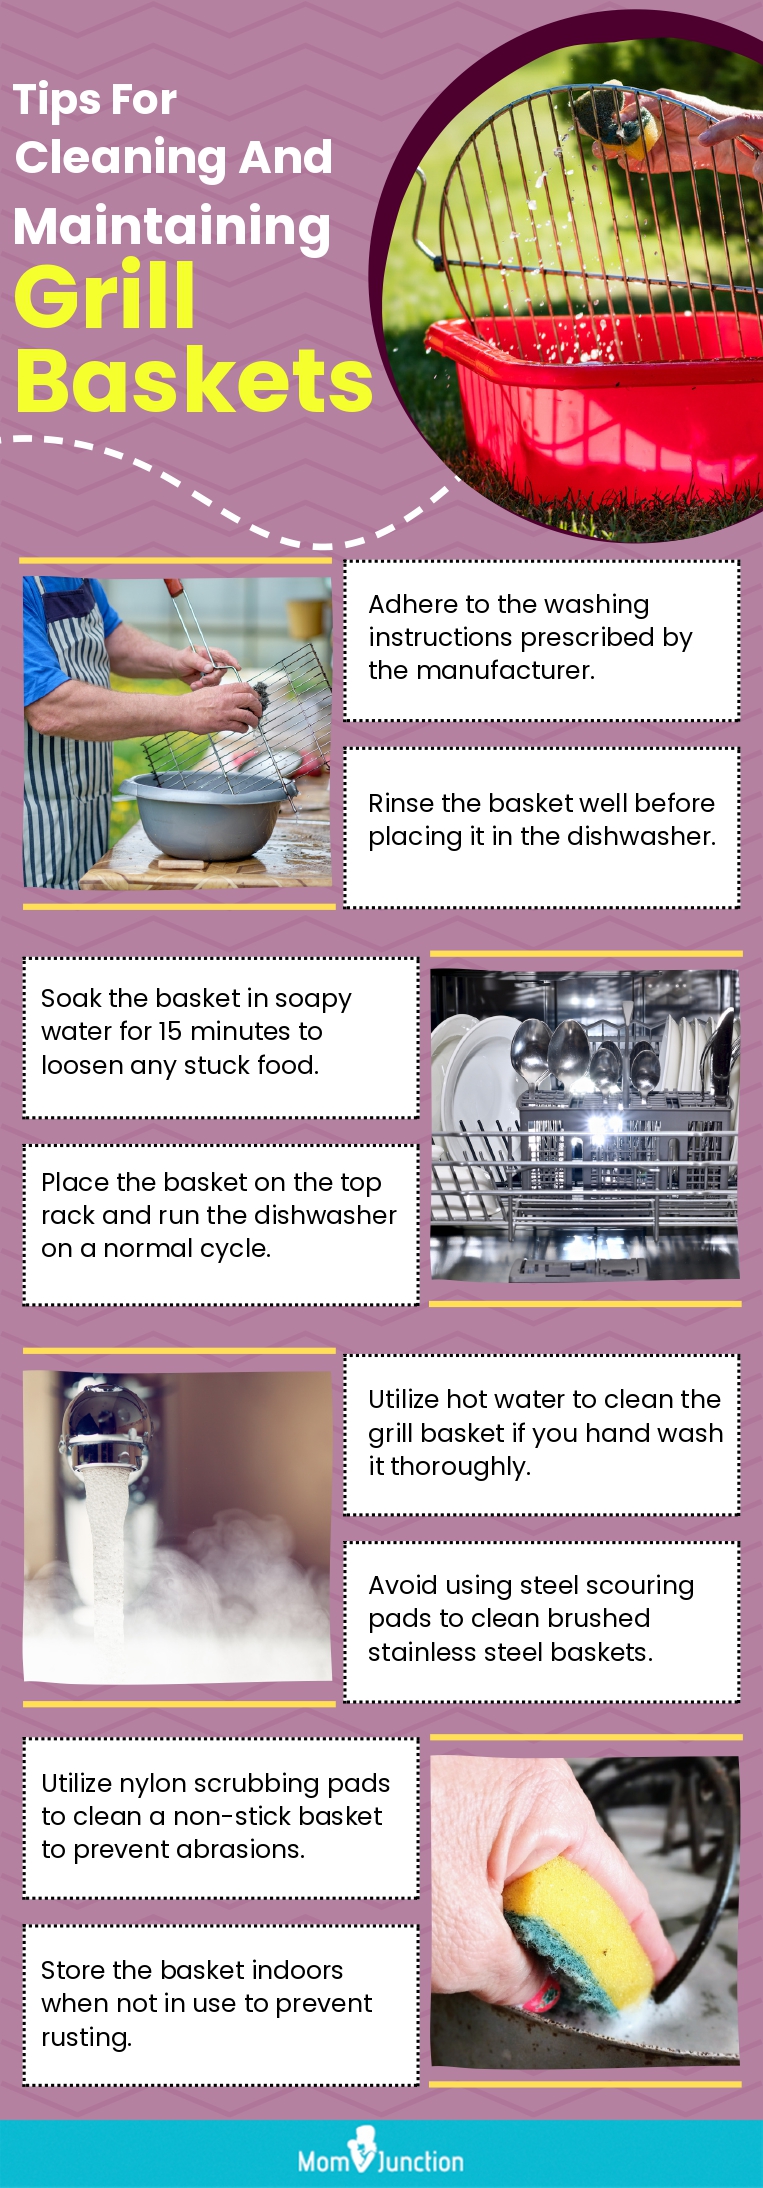 Tips For Cleaning And Maintaining Grill Baskets (infographic)